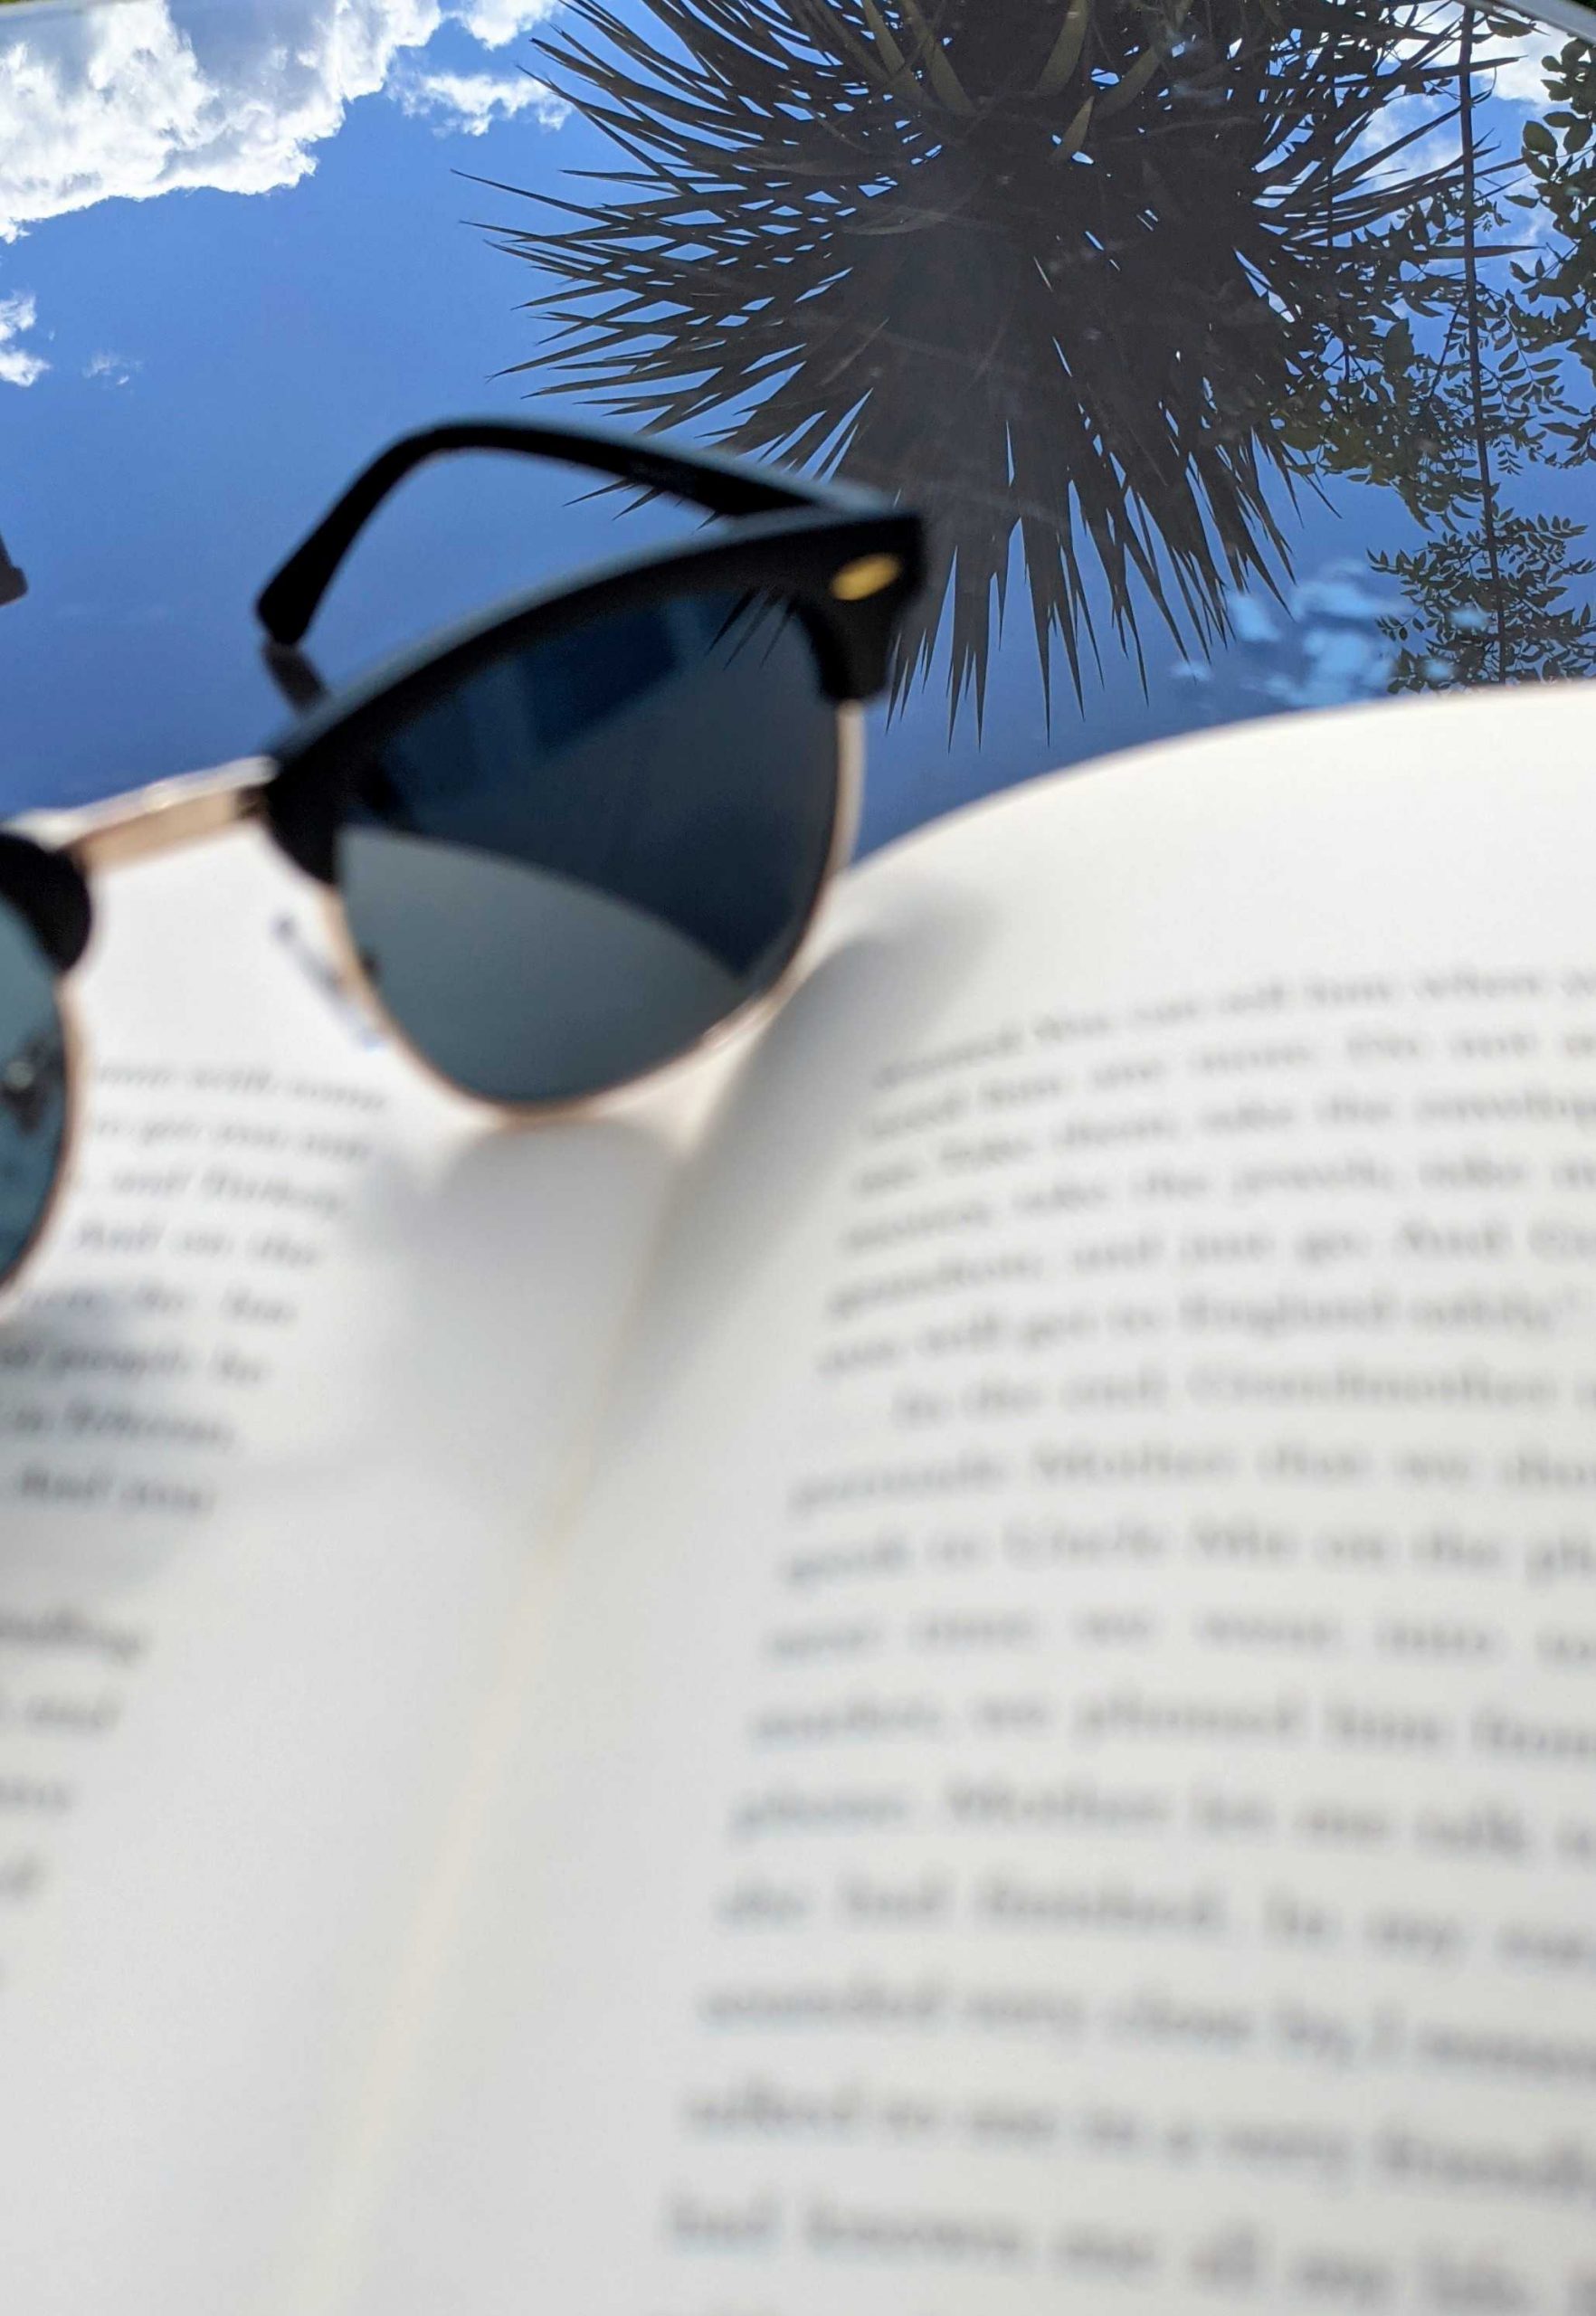 Amelia's submission to the Great British Photography Challenge shows a close up of the top of a book with sunglasses laid on top, and a blue sky and trees in the background.